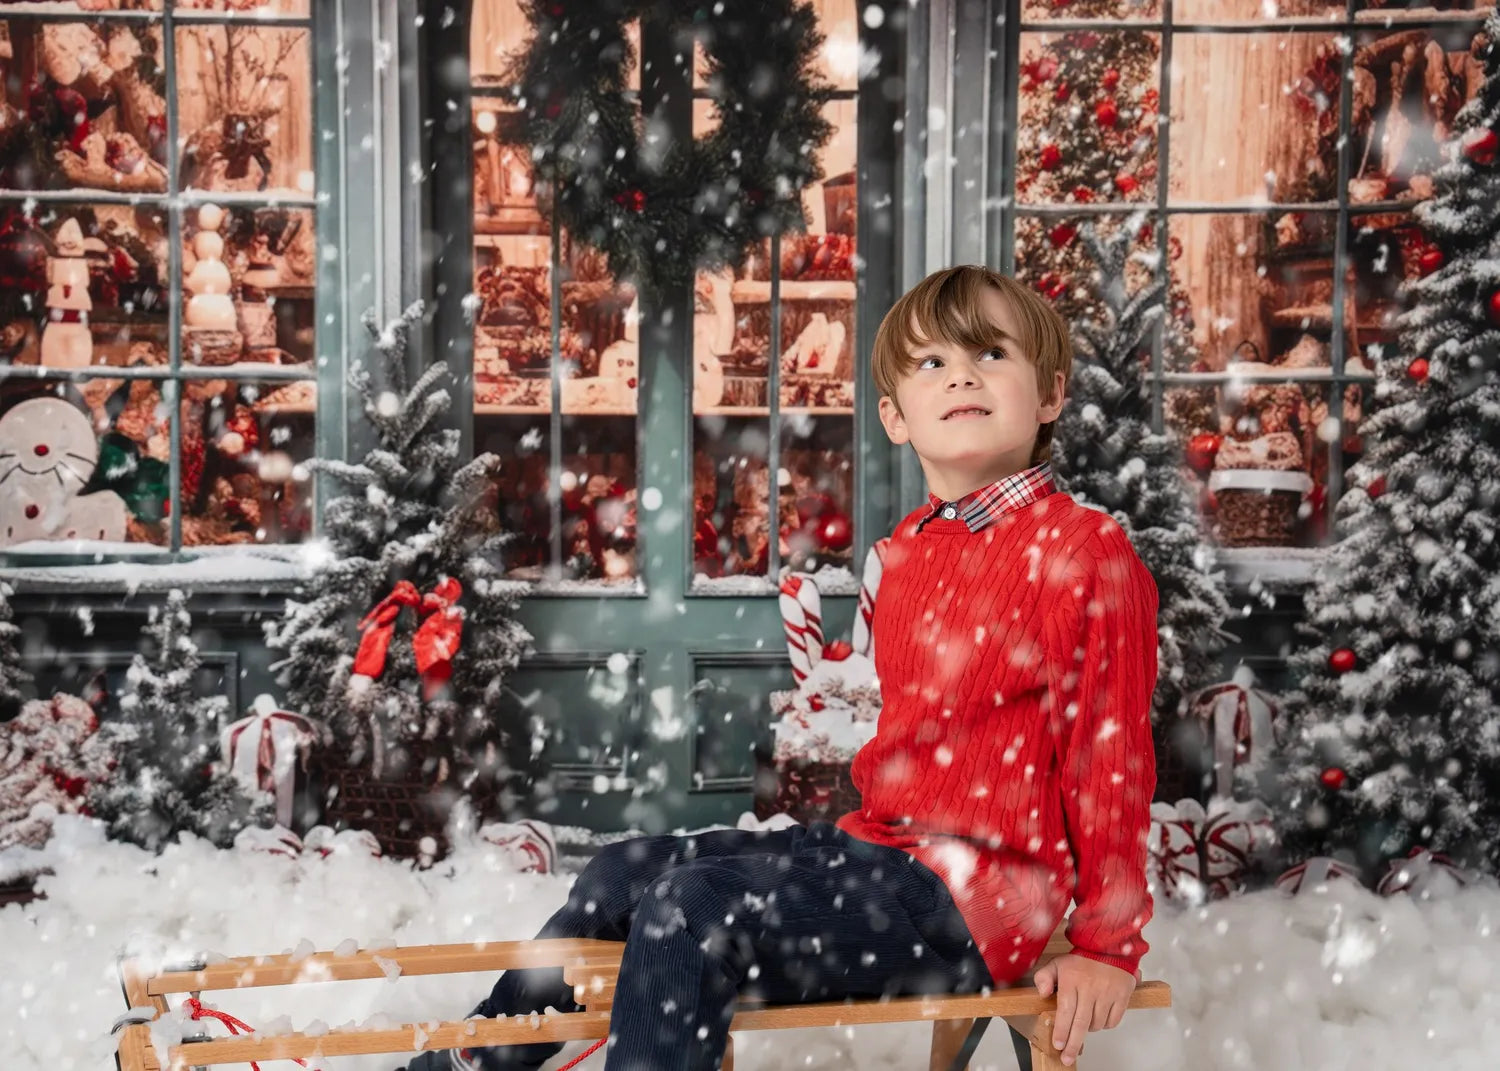 Kate Christmas Gift Store in Snow Fleece Backdrop for Photography